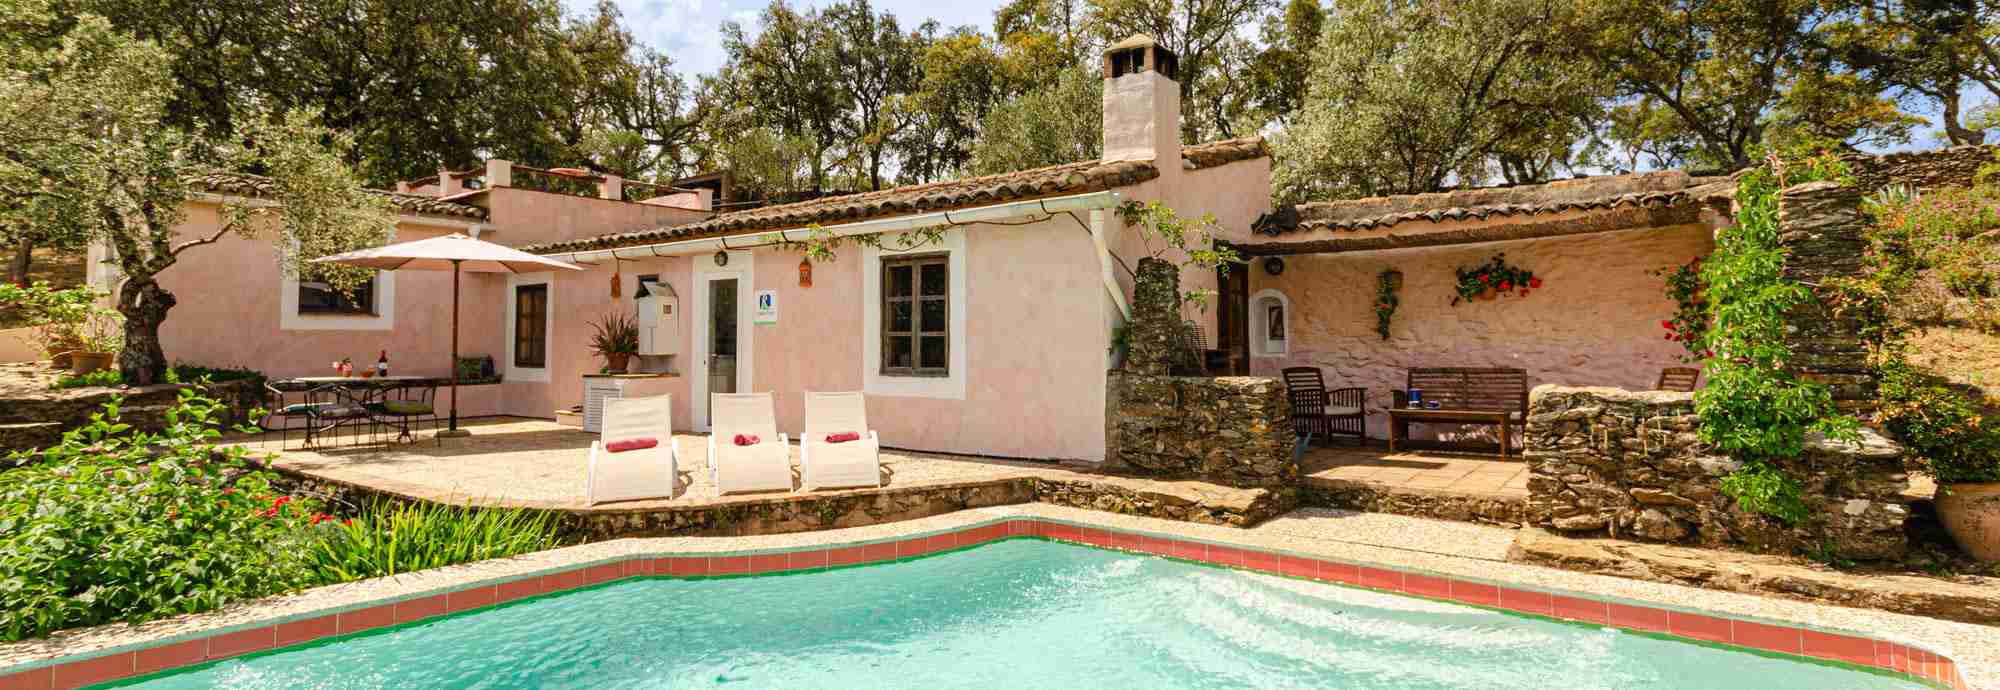 Two-bedroom rustic cottage with a gorgeous pool in a delightful private spot